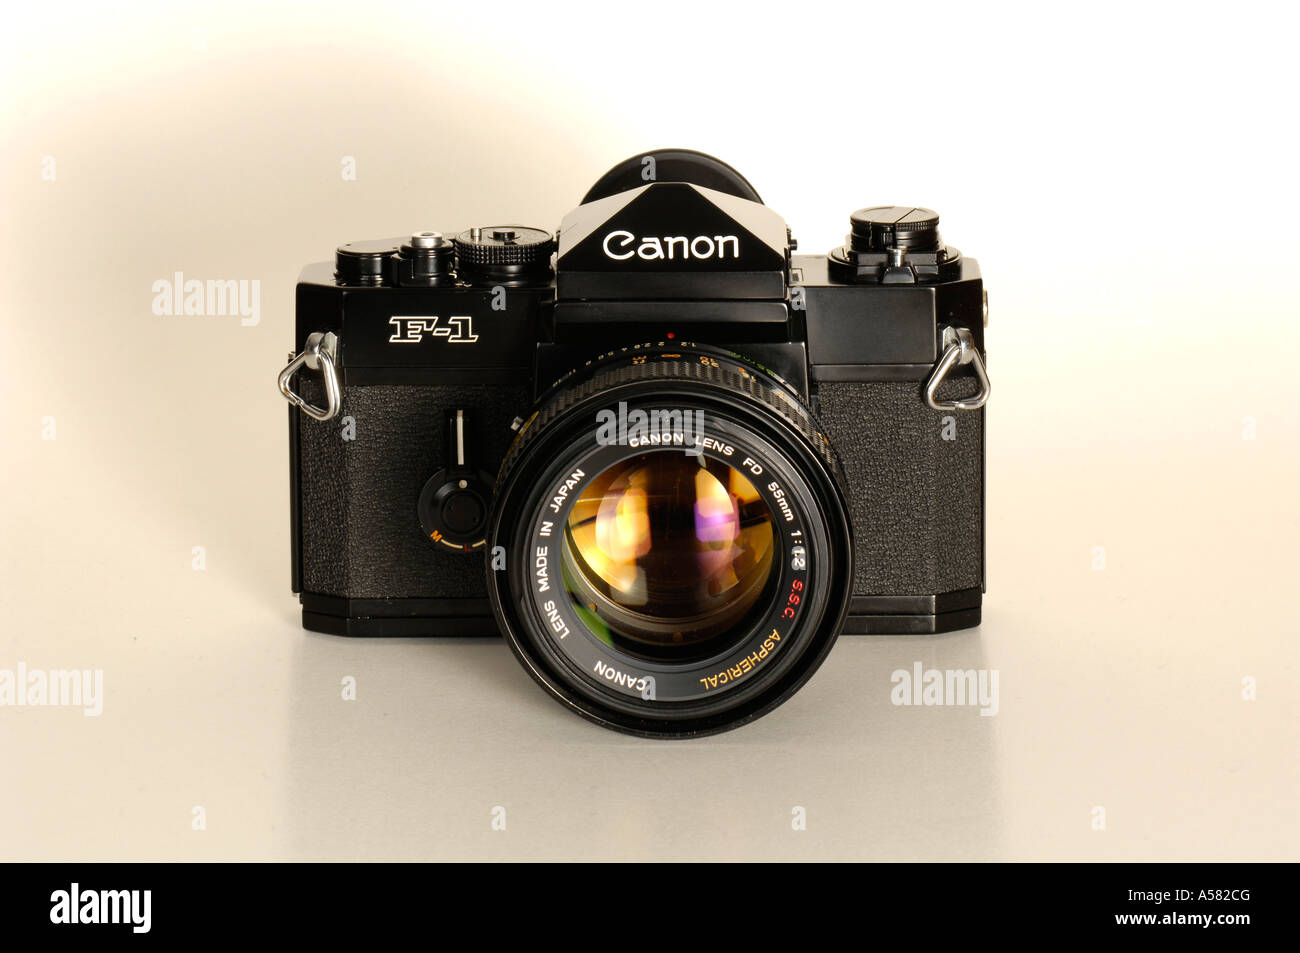 Analogue single lens reflex camera Canon F-1 of the 1970s front Stock Photo